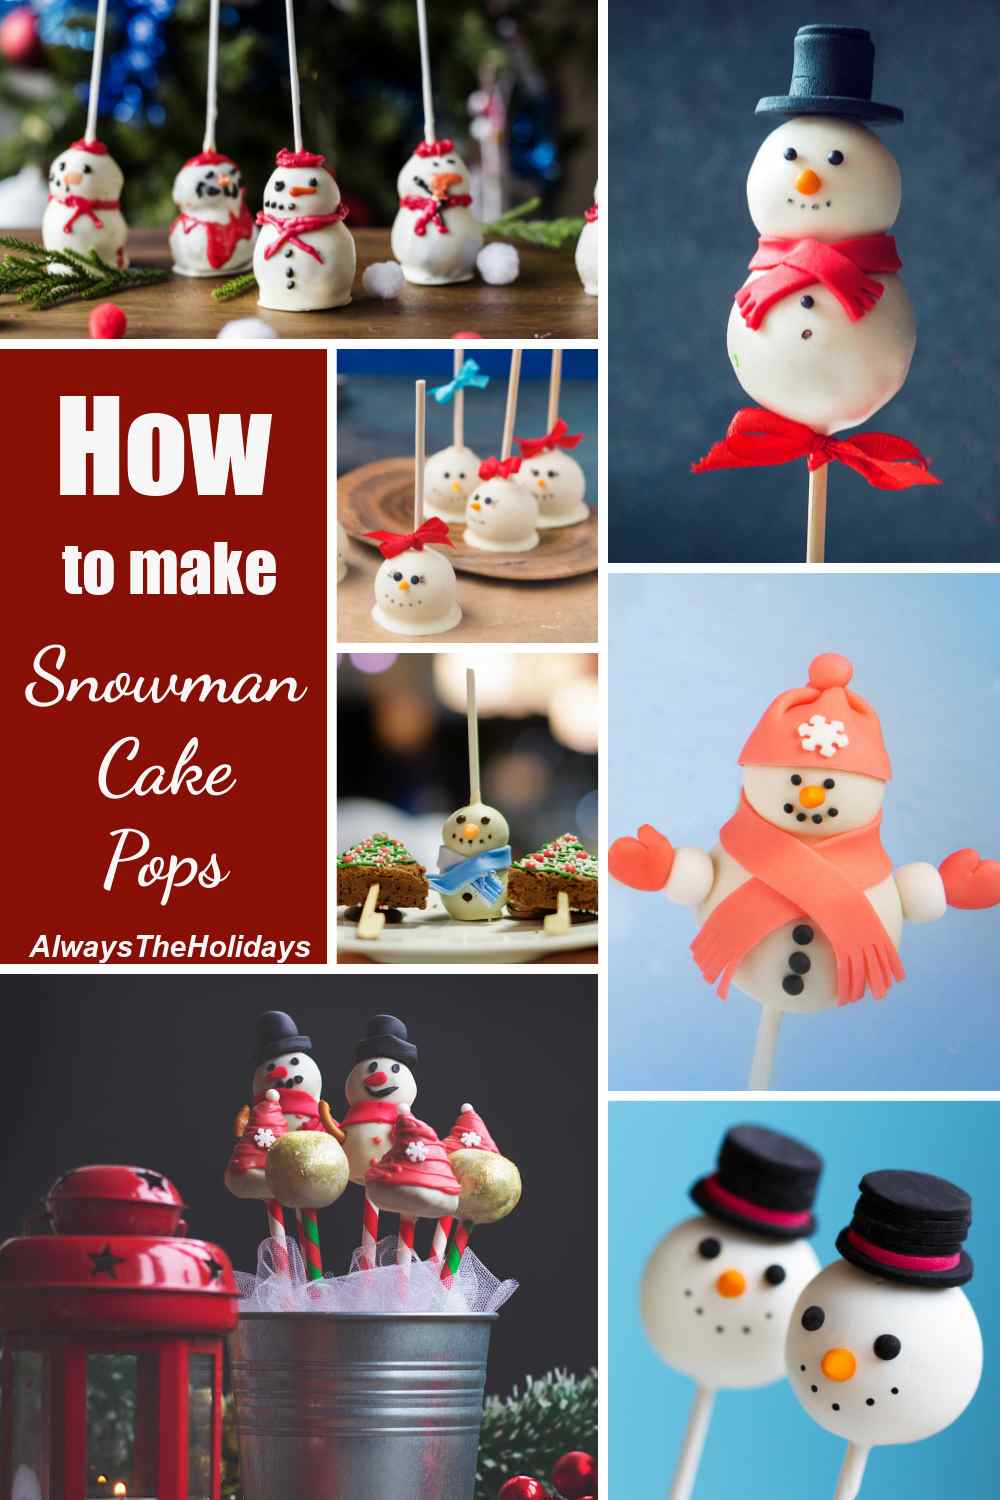 Christmas cake pops with words How to make snowman cake pops